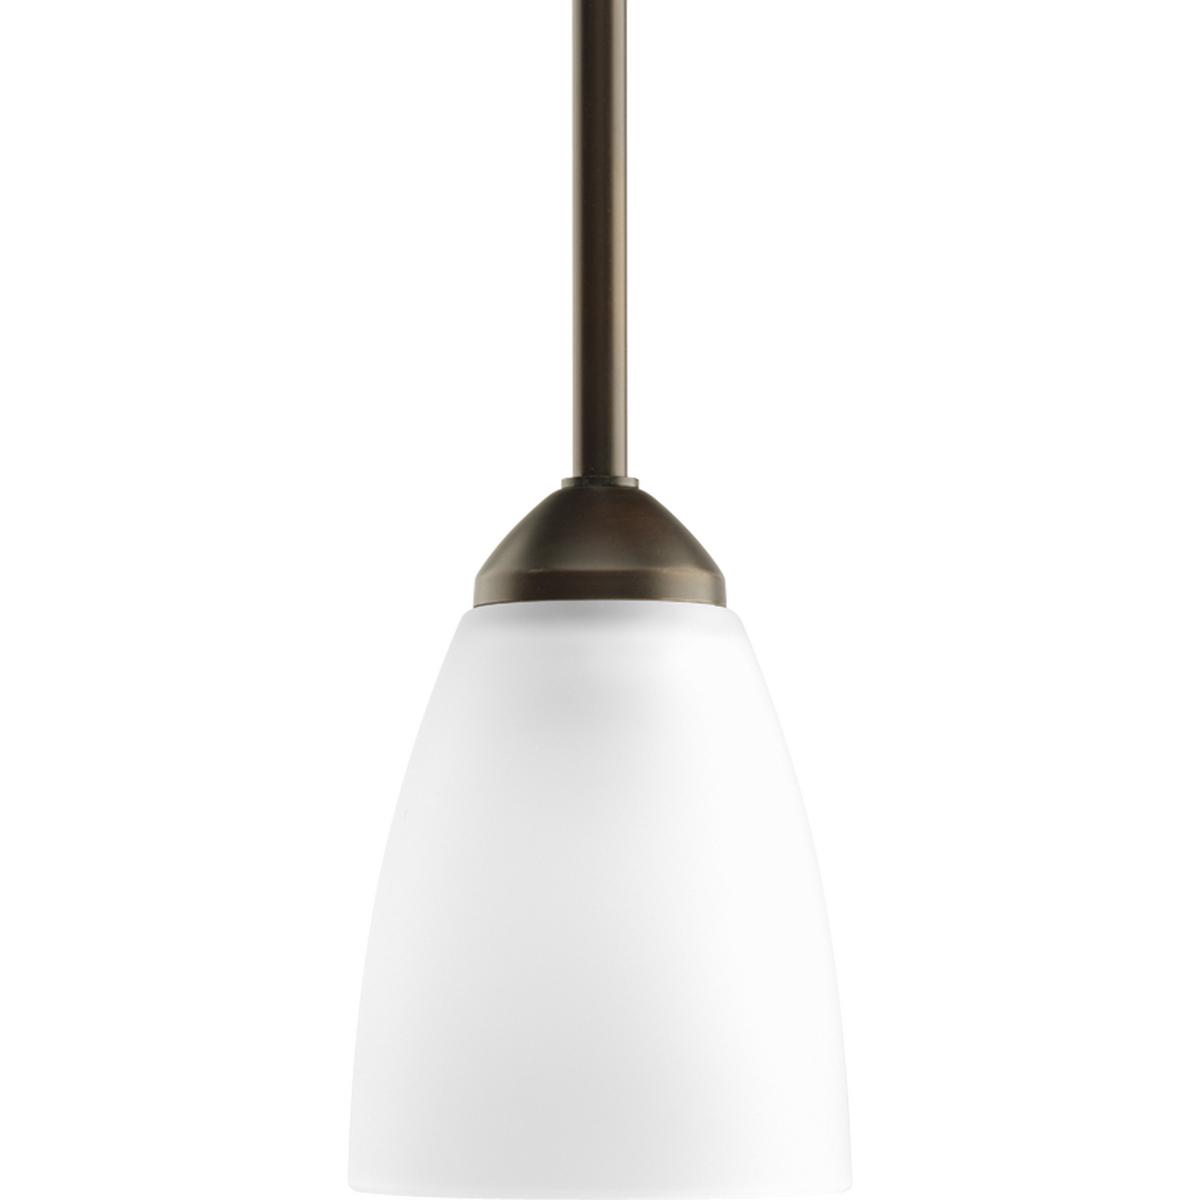 Hubbell P5113-20 Gather possesses a smart simplicity to complement today's home. This one-light mini-pendant contains etched glass shades which add distinction and provide pleasing illumination to your room. Complimented by a Antique Bronze finish.  ; Antique Bronze finis